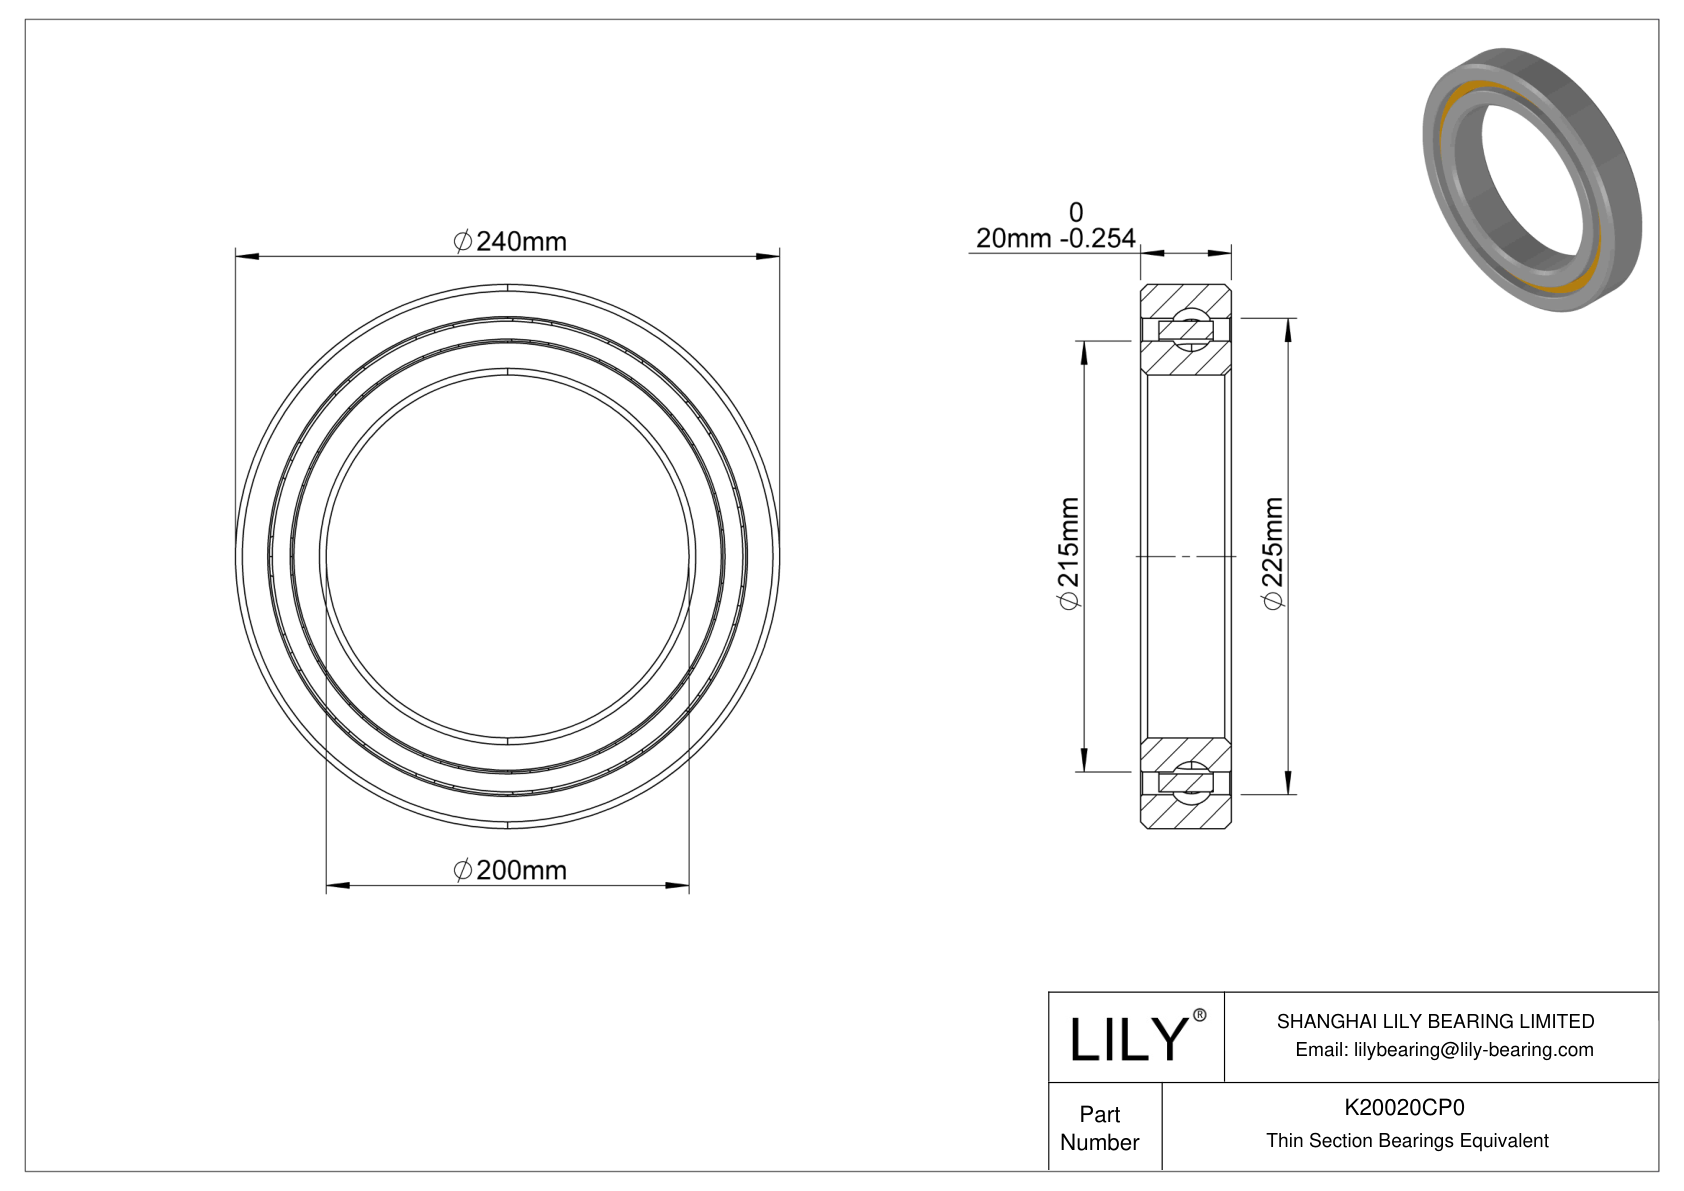 K20020CP0 Constant Section (CS) Bearings cad drawing